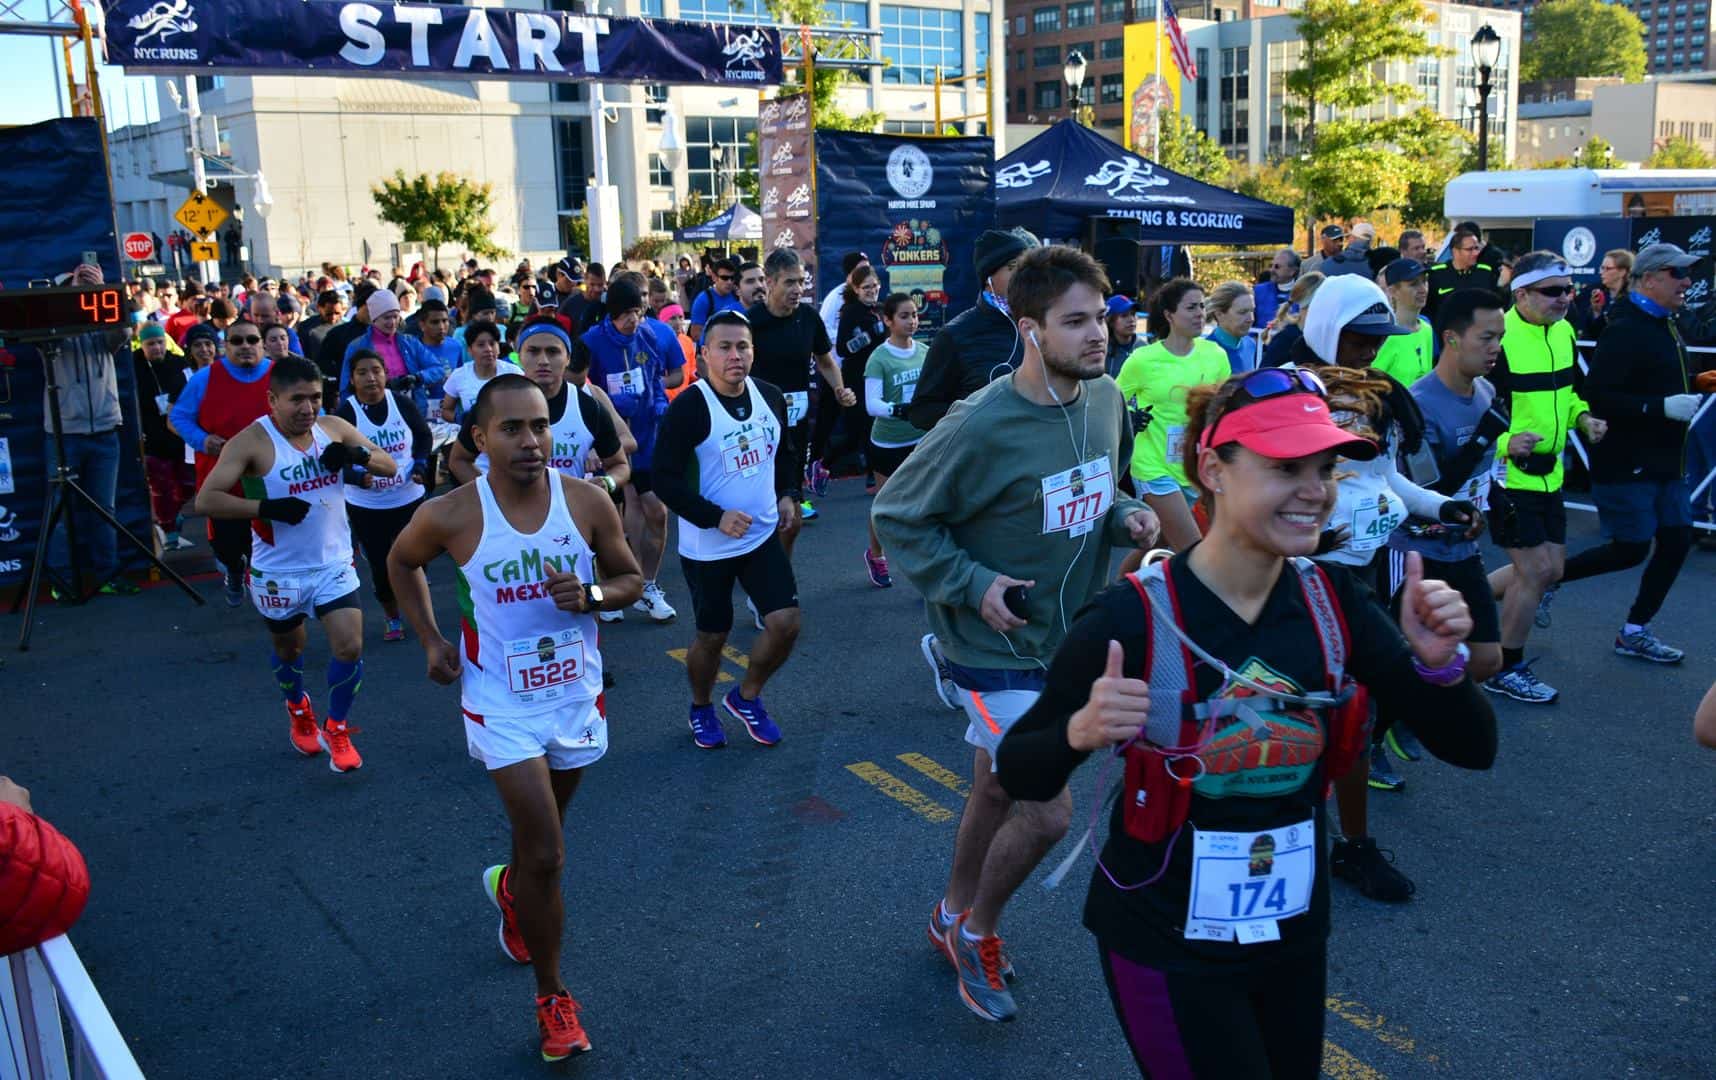 95th Yonkers Marathon, The Second Oldest in The United States, is Back